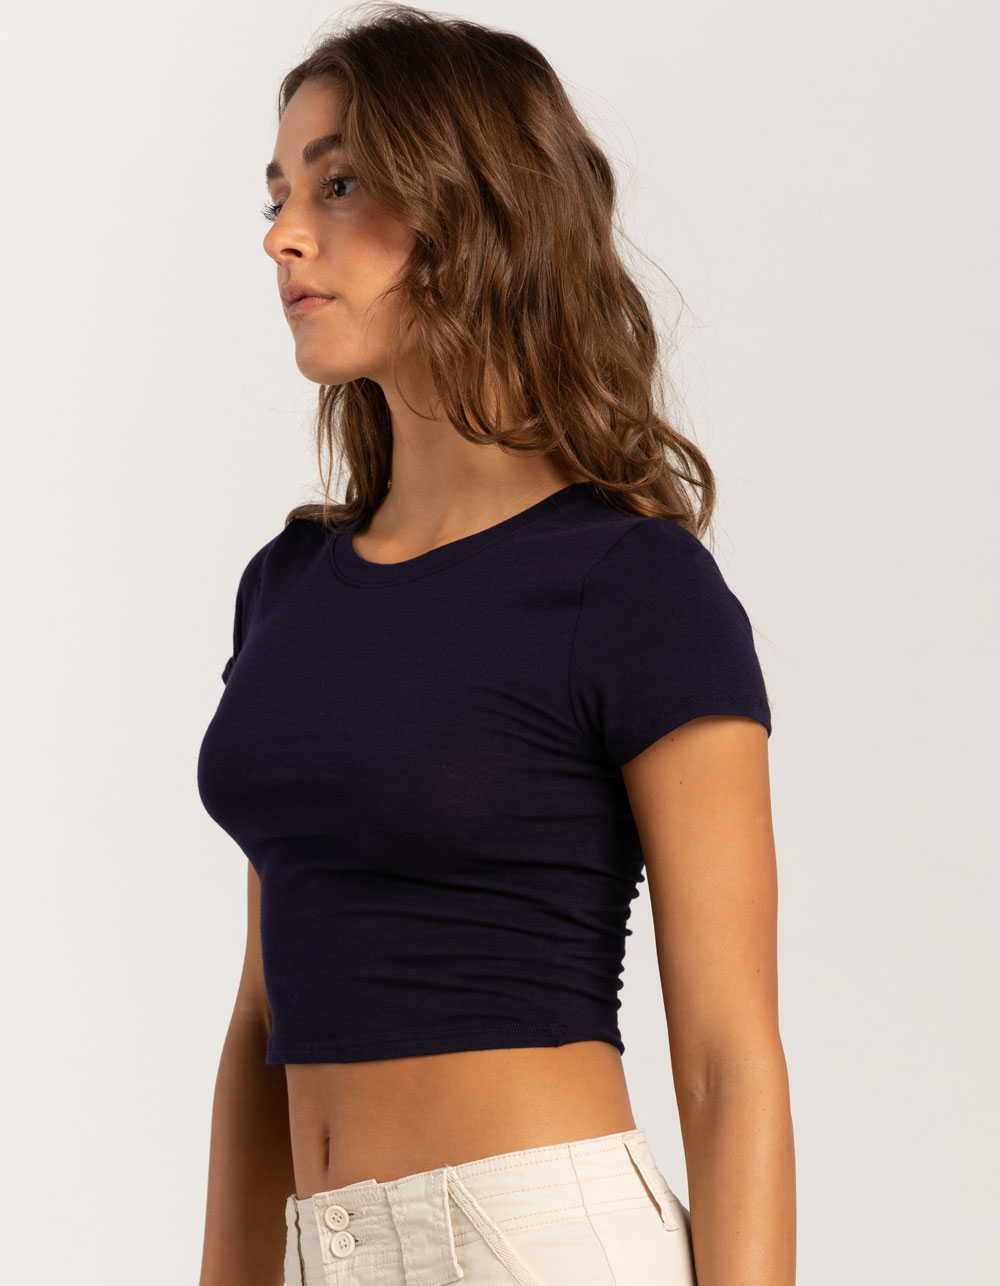 BOZZOLO Womens Cropped Tee - NAVY